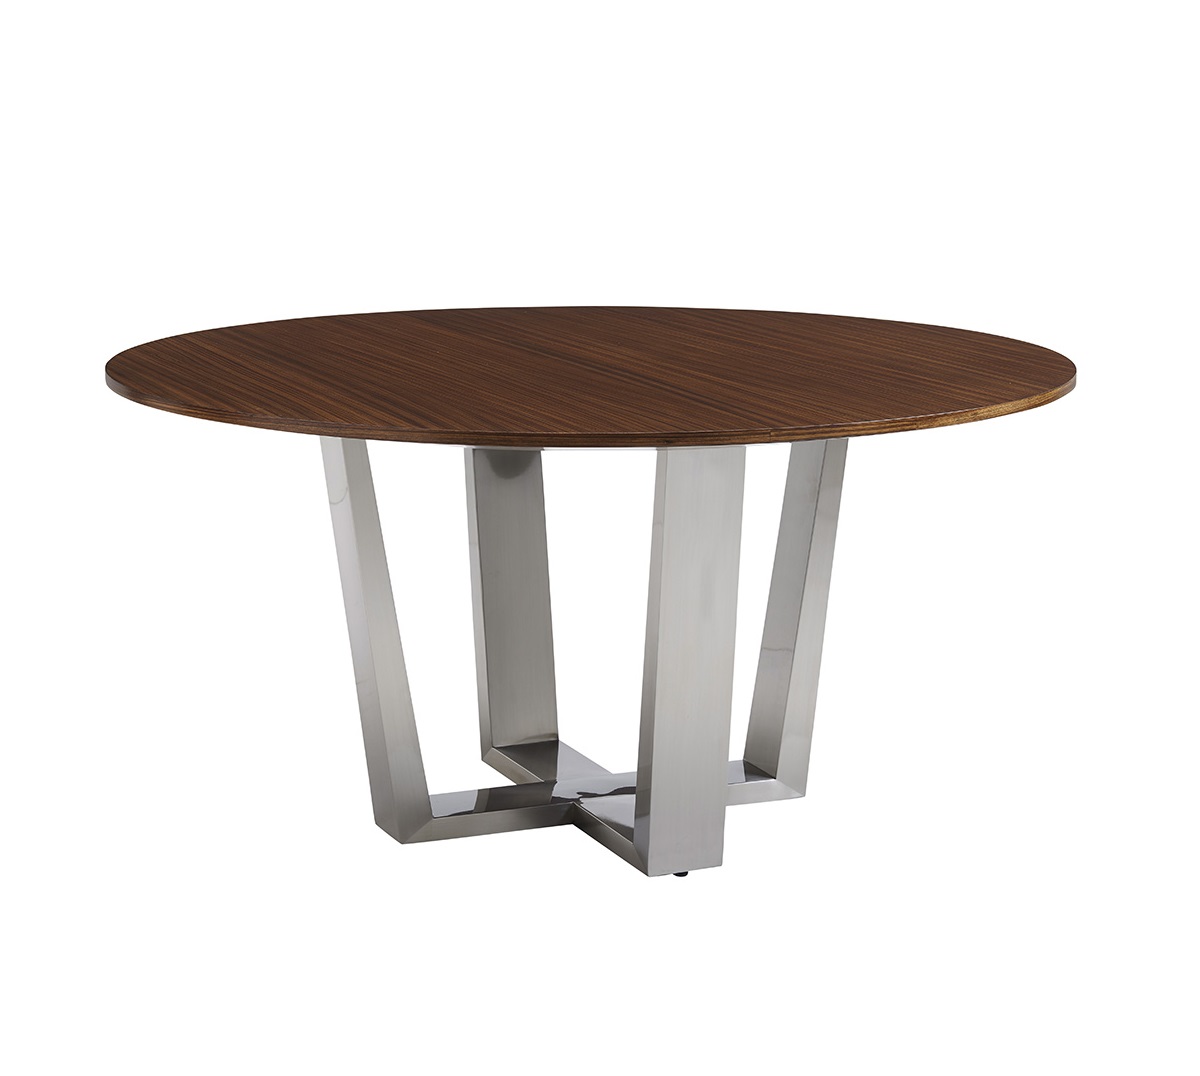 Kitano Mandara Round Dining Table, Lexington Round Dining Tables For Sale